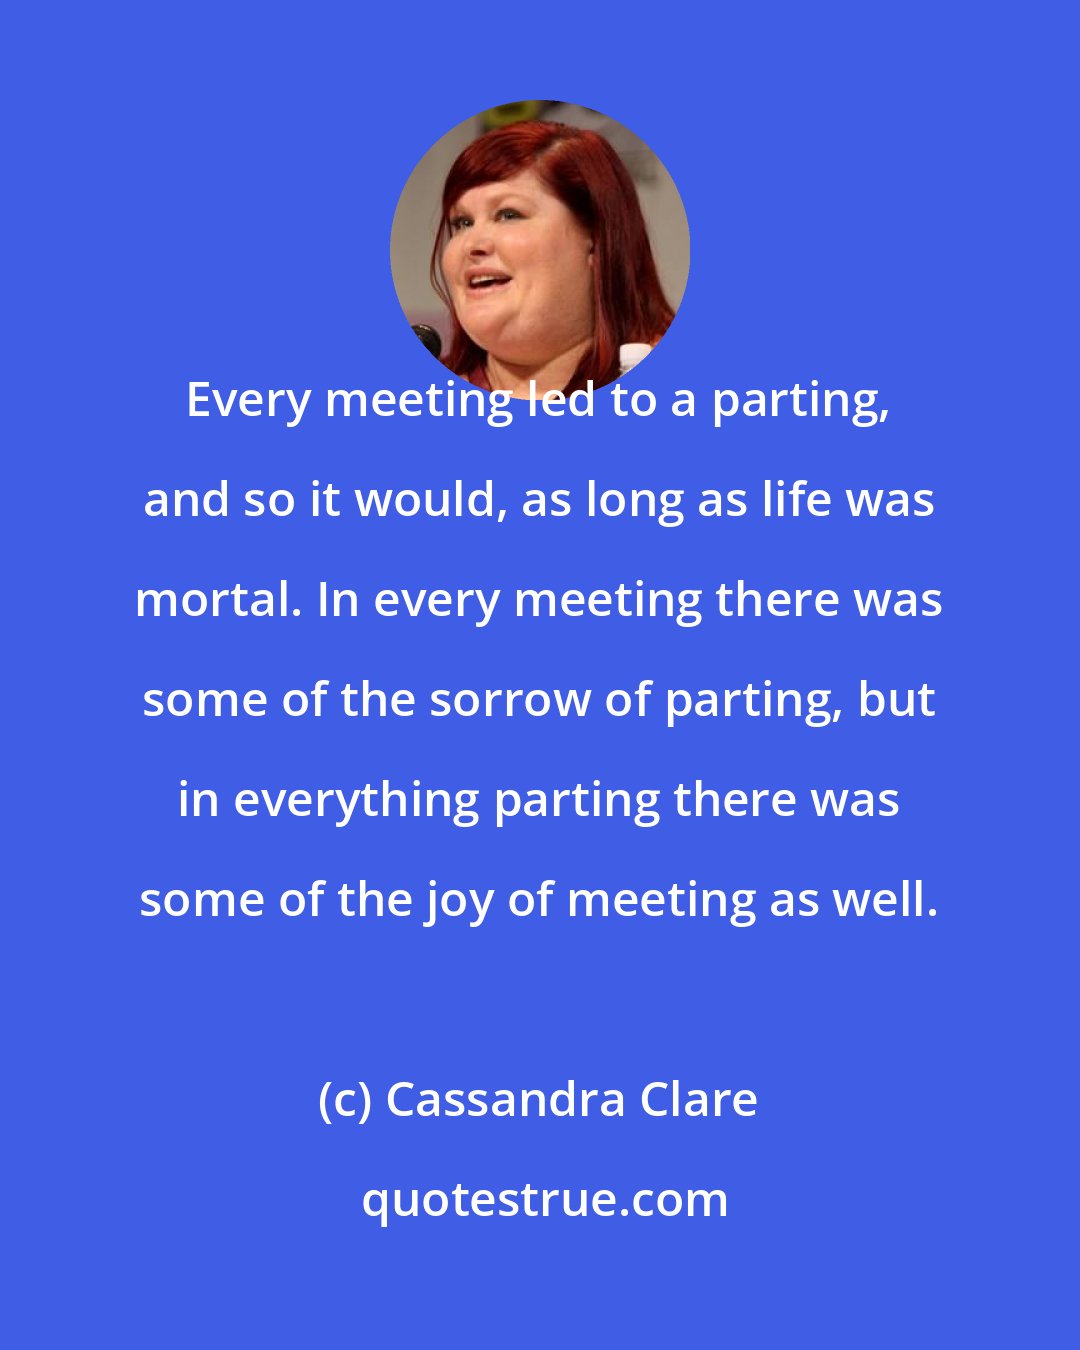 Cassandra Clare: Every meeting led to a parting, and so it would, as long as life was mortal. In every meeting there was some of the sorrow of parting, but in everything parting there was some of the joy of meeting as well.